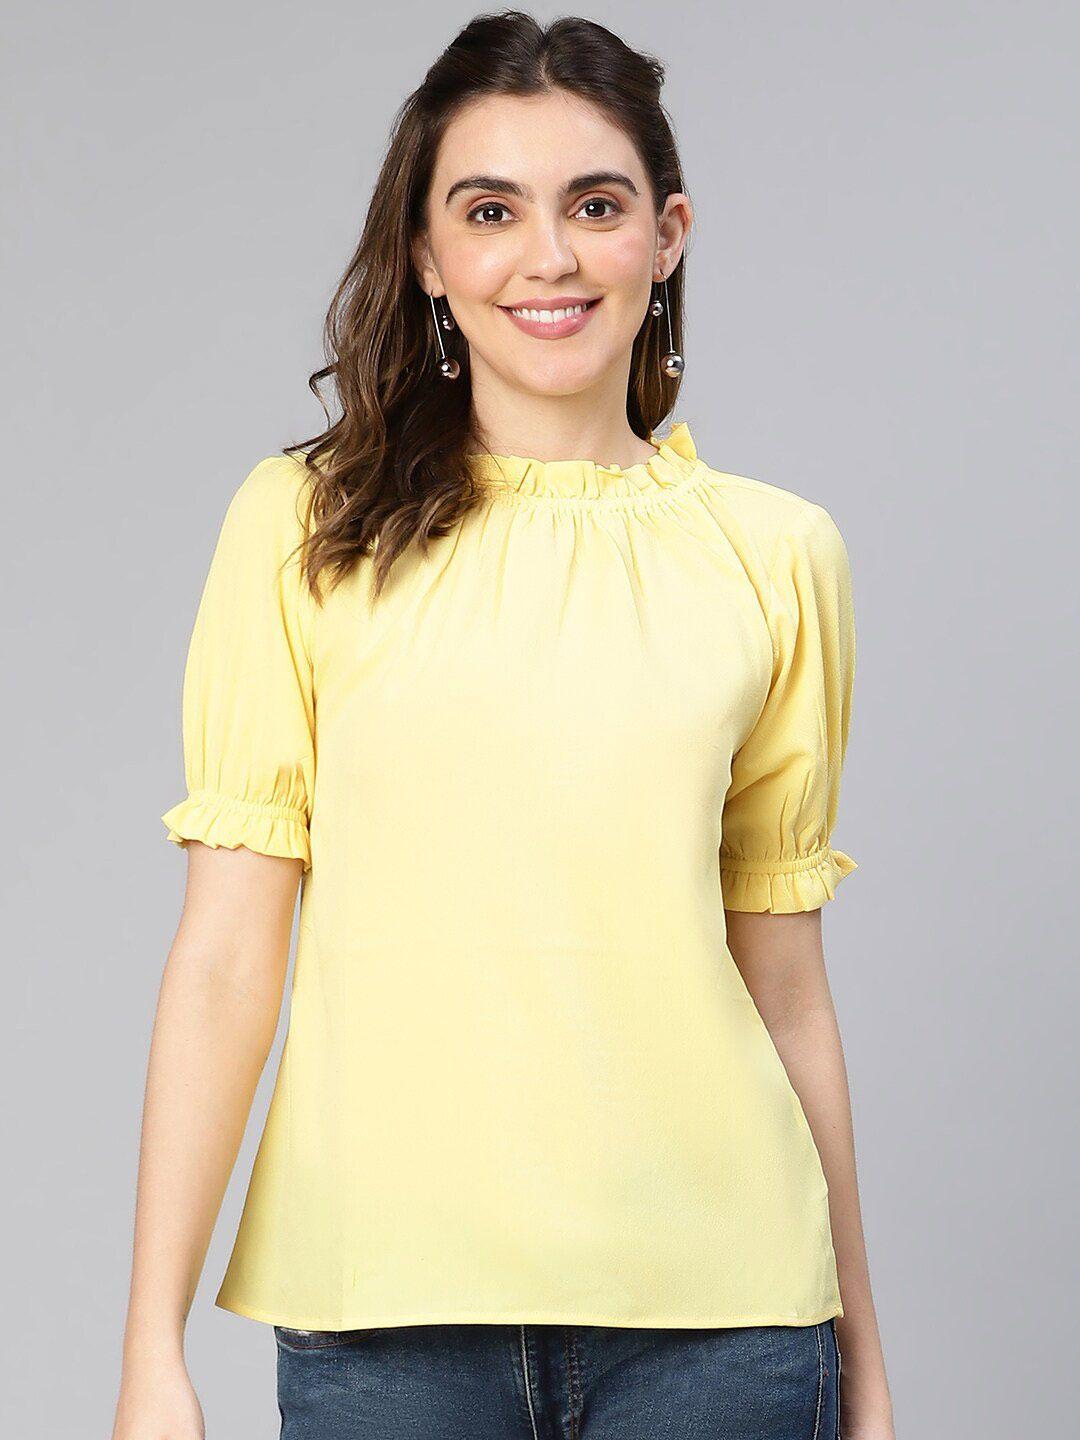 oxolloxo-gathered-puff-sleeves-a-line-top